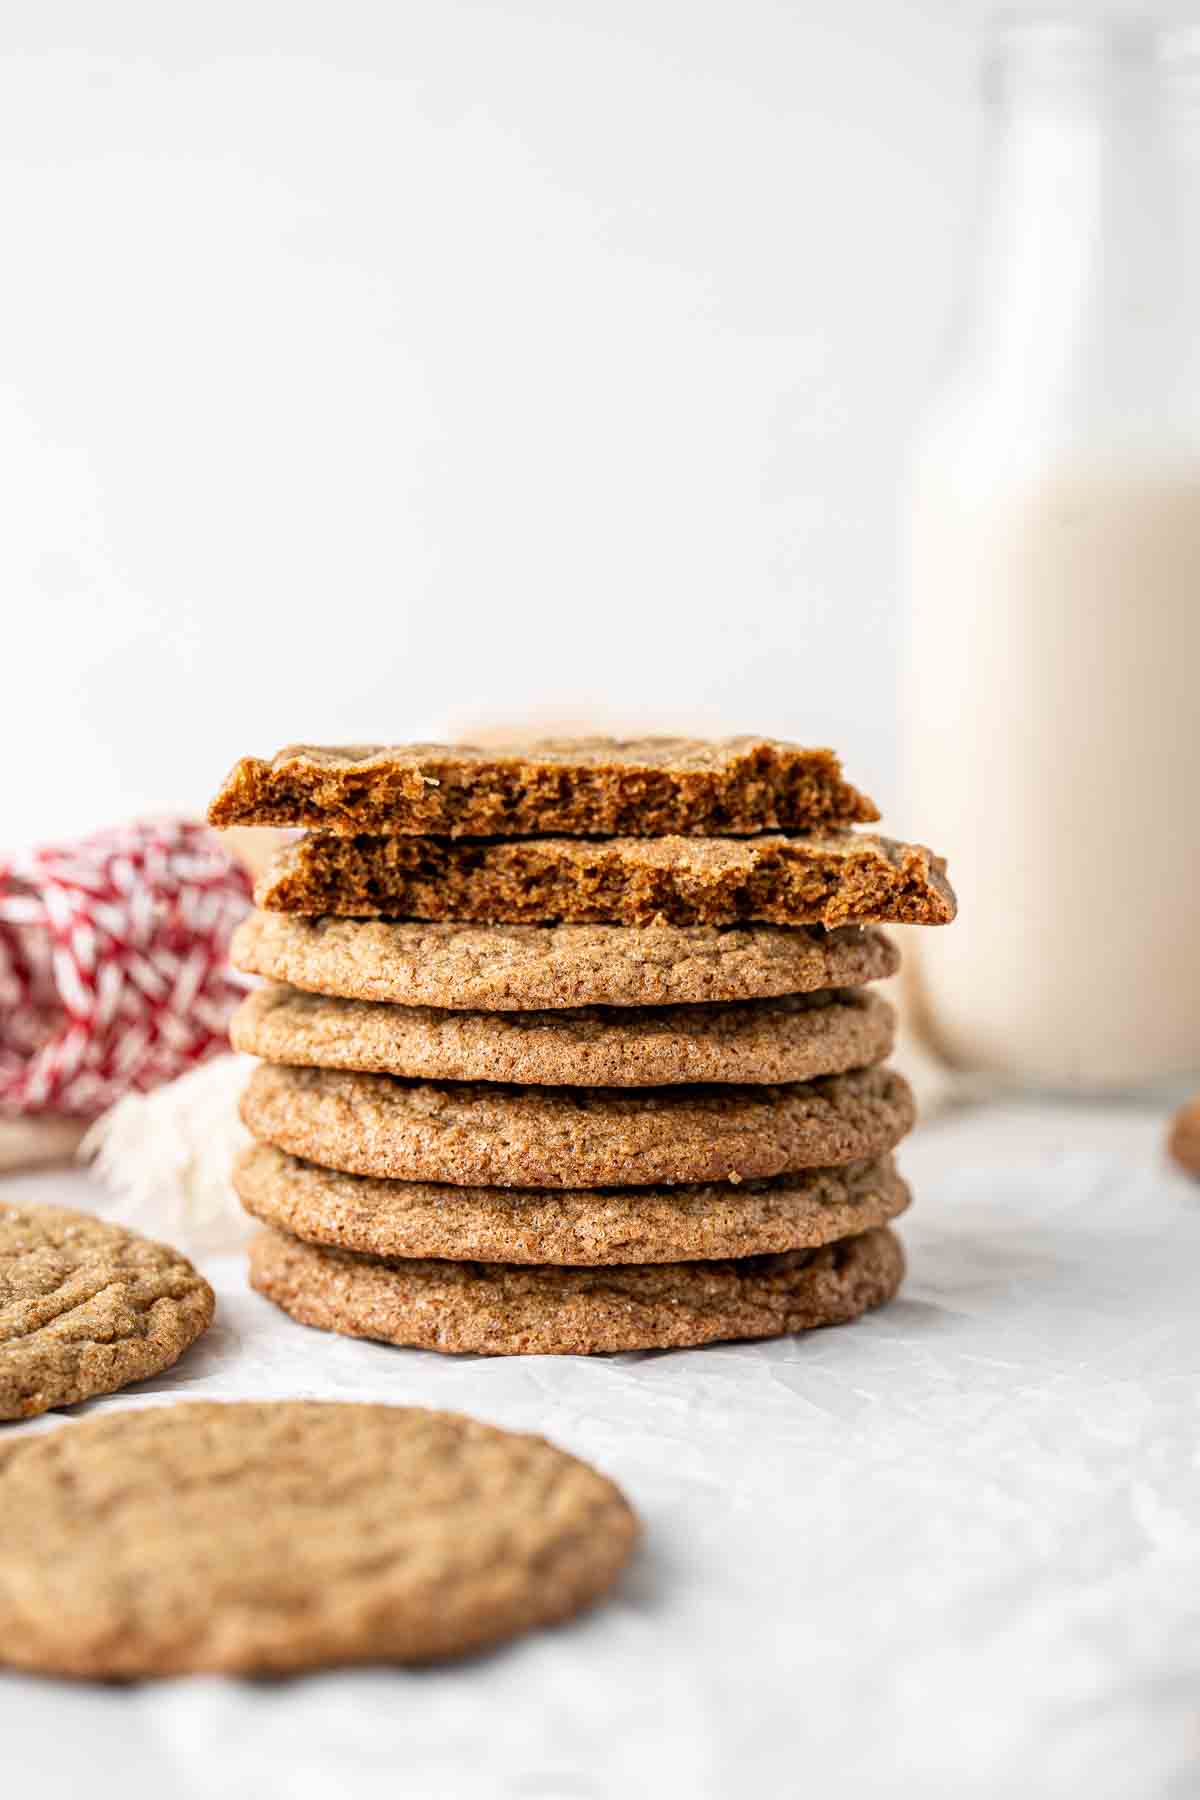 Stack of ginger snap biscuits with the top one broken in half.